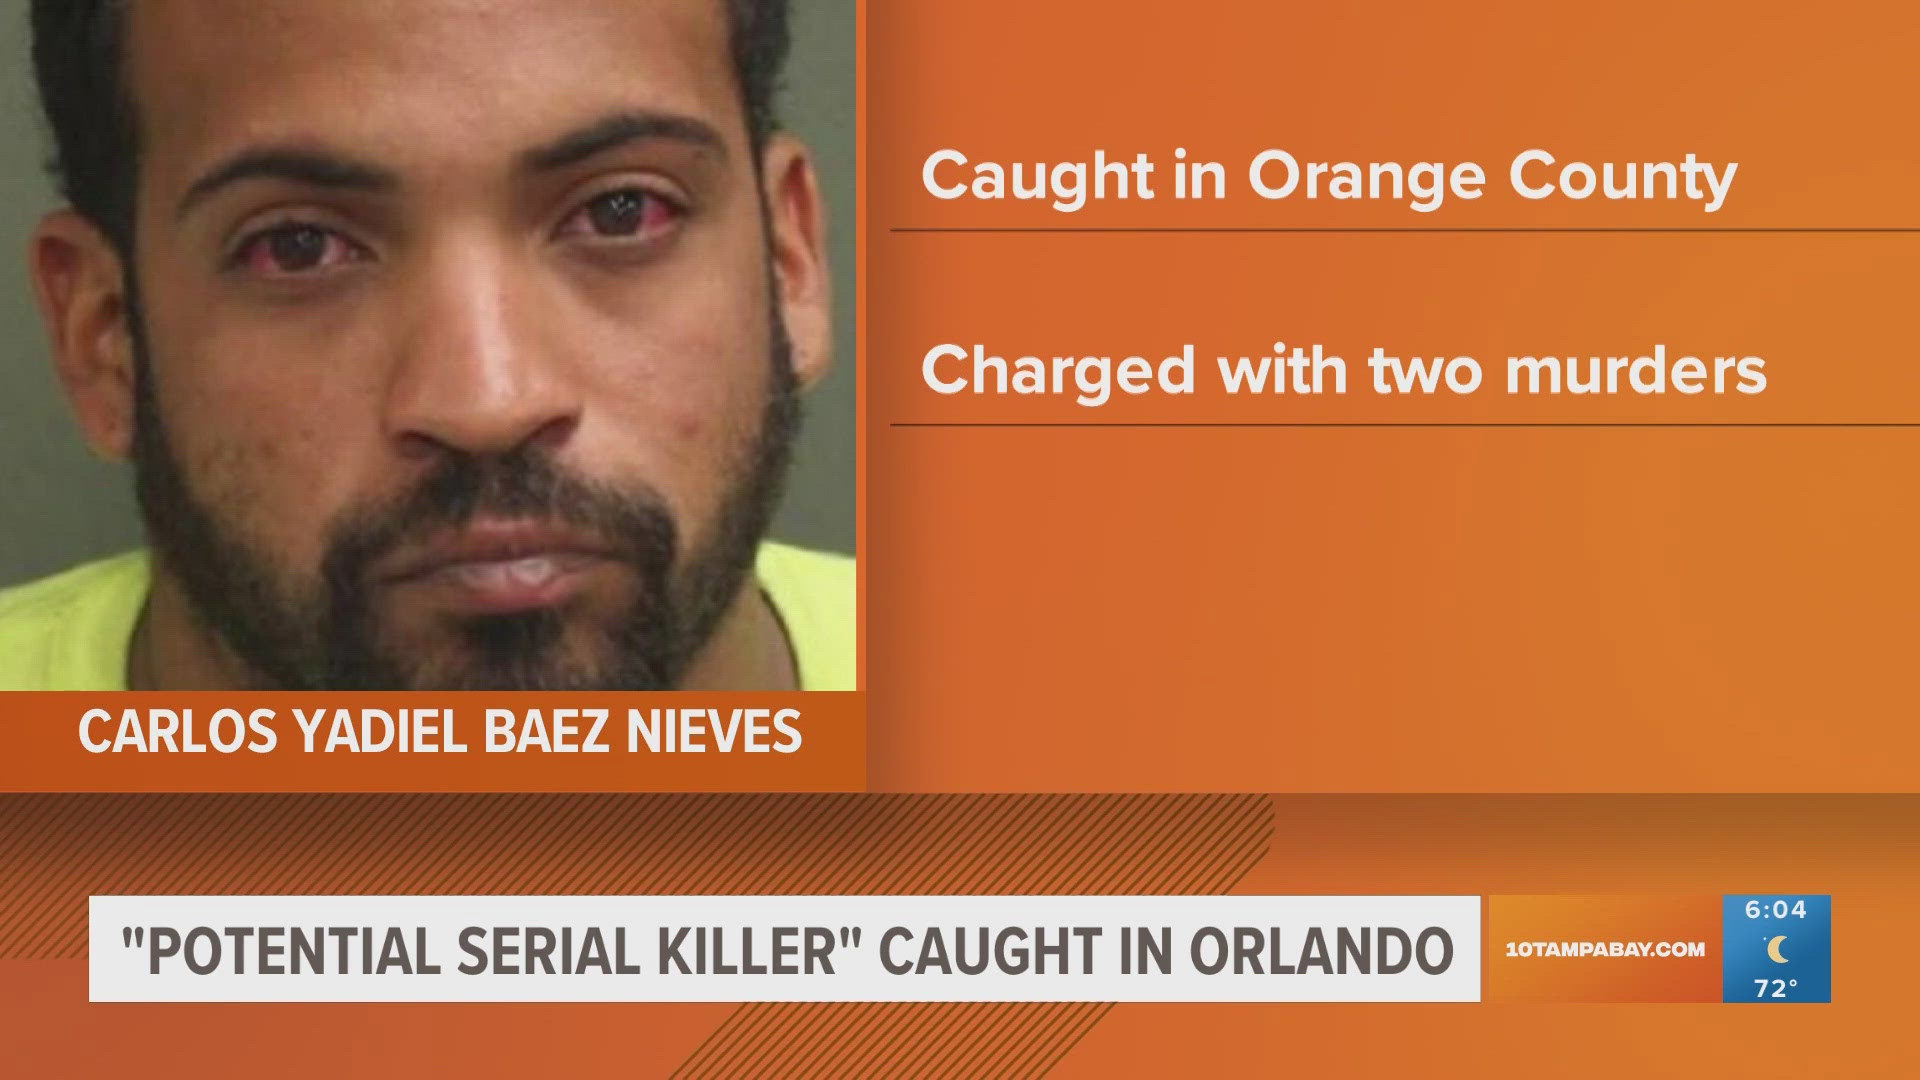 Investigators say Carlos Yadiel Baez paid to have sex with two women in separate incidents earlier this year, strangled them and dumped their bodies in east Orlando.